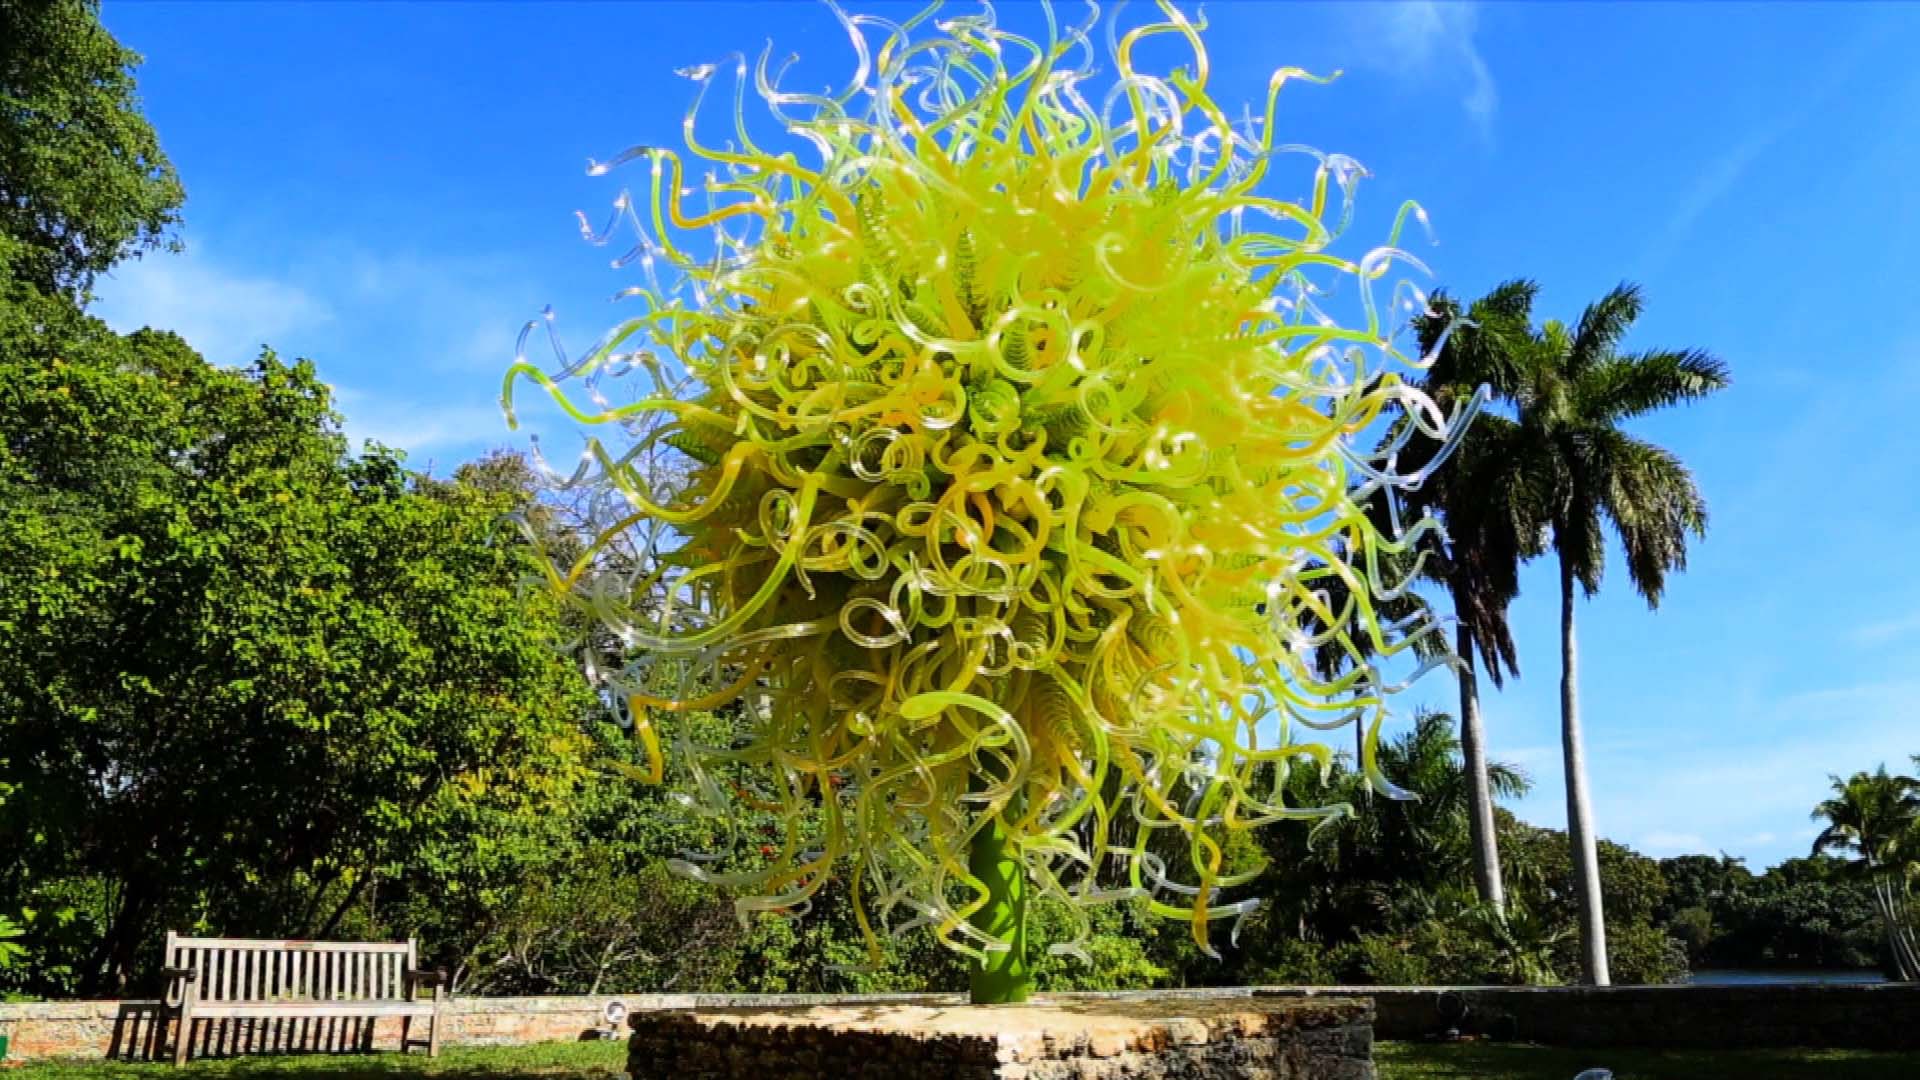 DALE CHIHULY